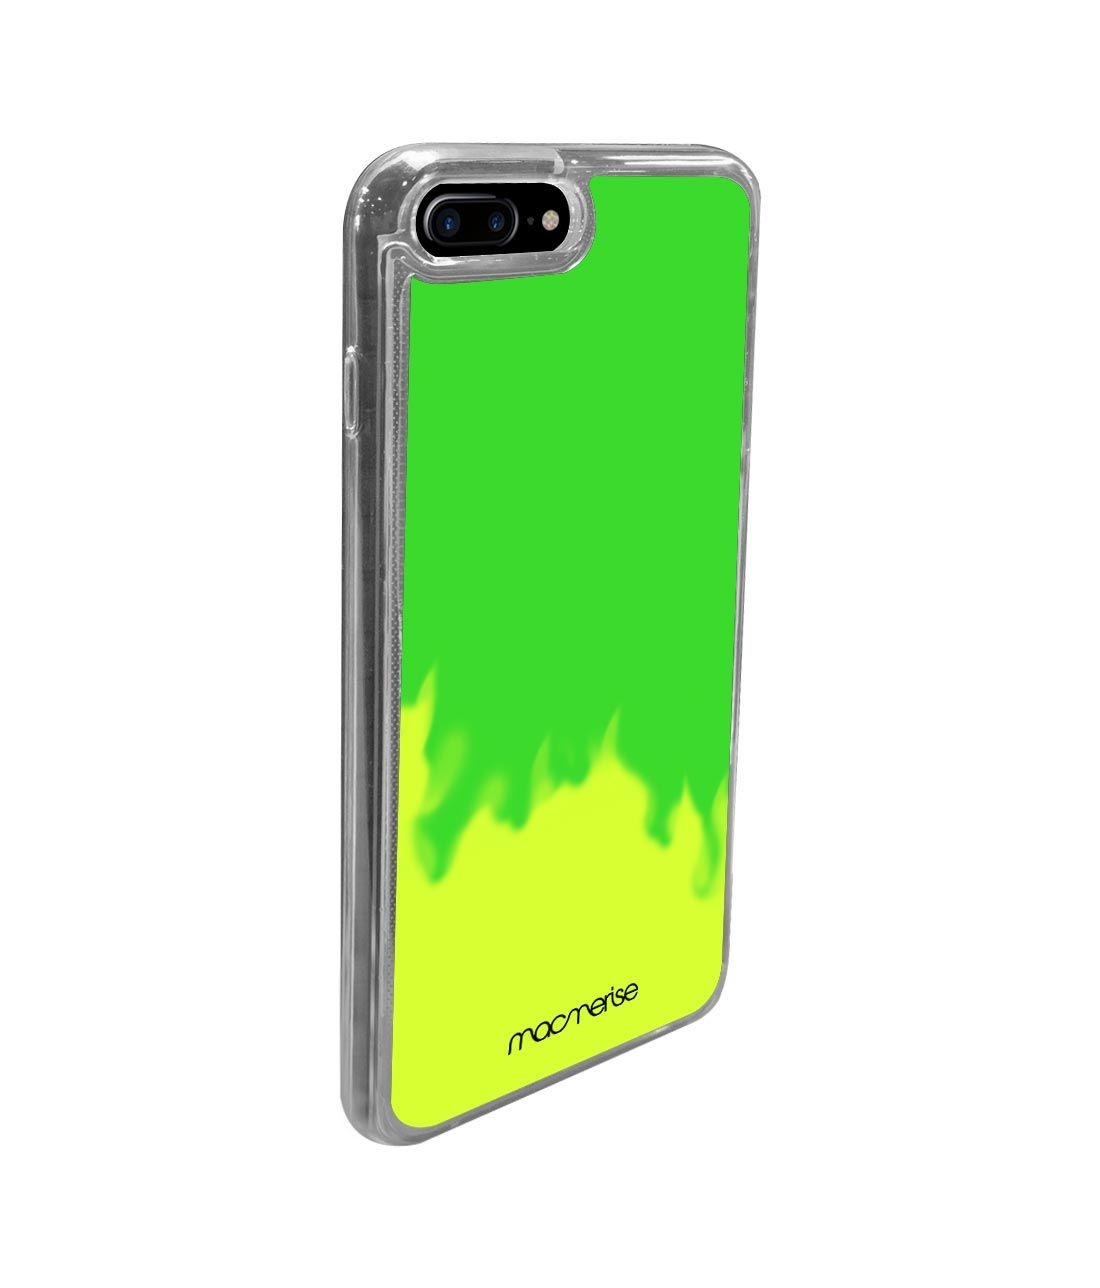 Neon Sand Green - Neon Sand Phone Case for iPhone 7 Plus